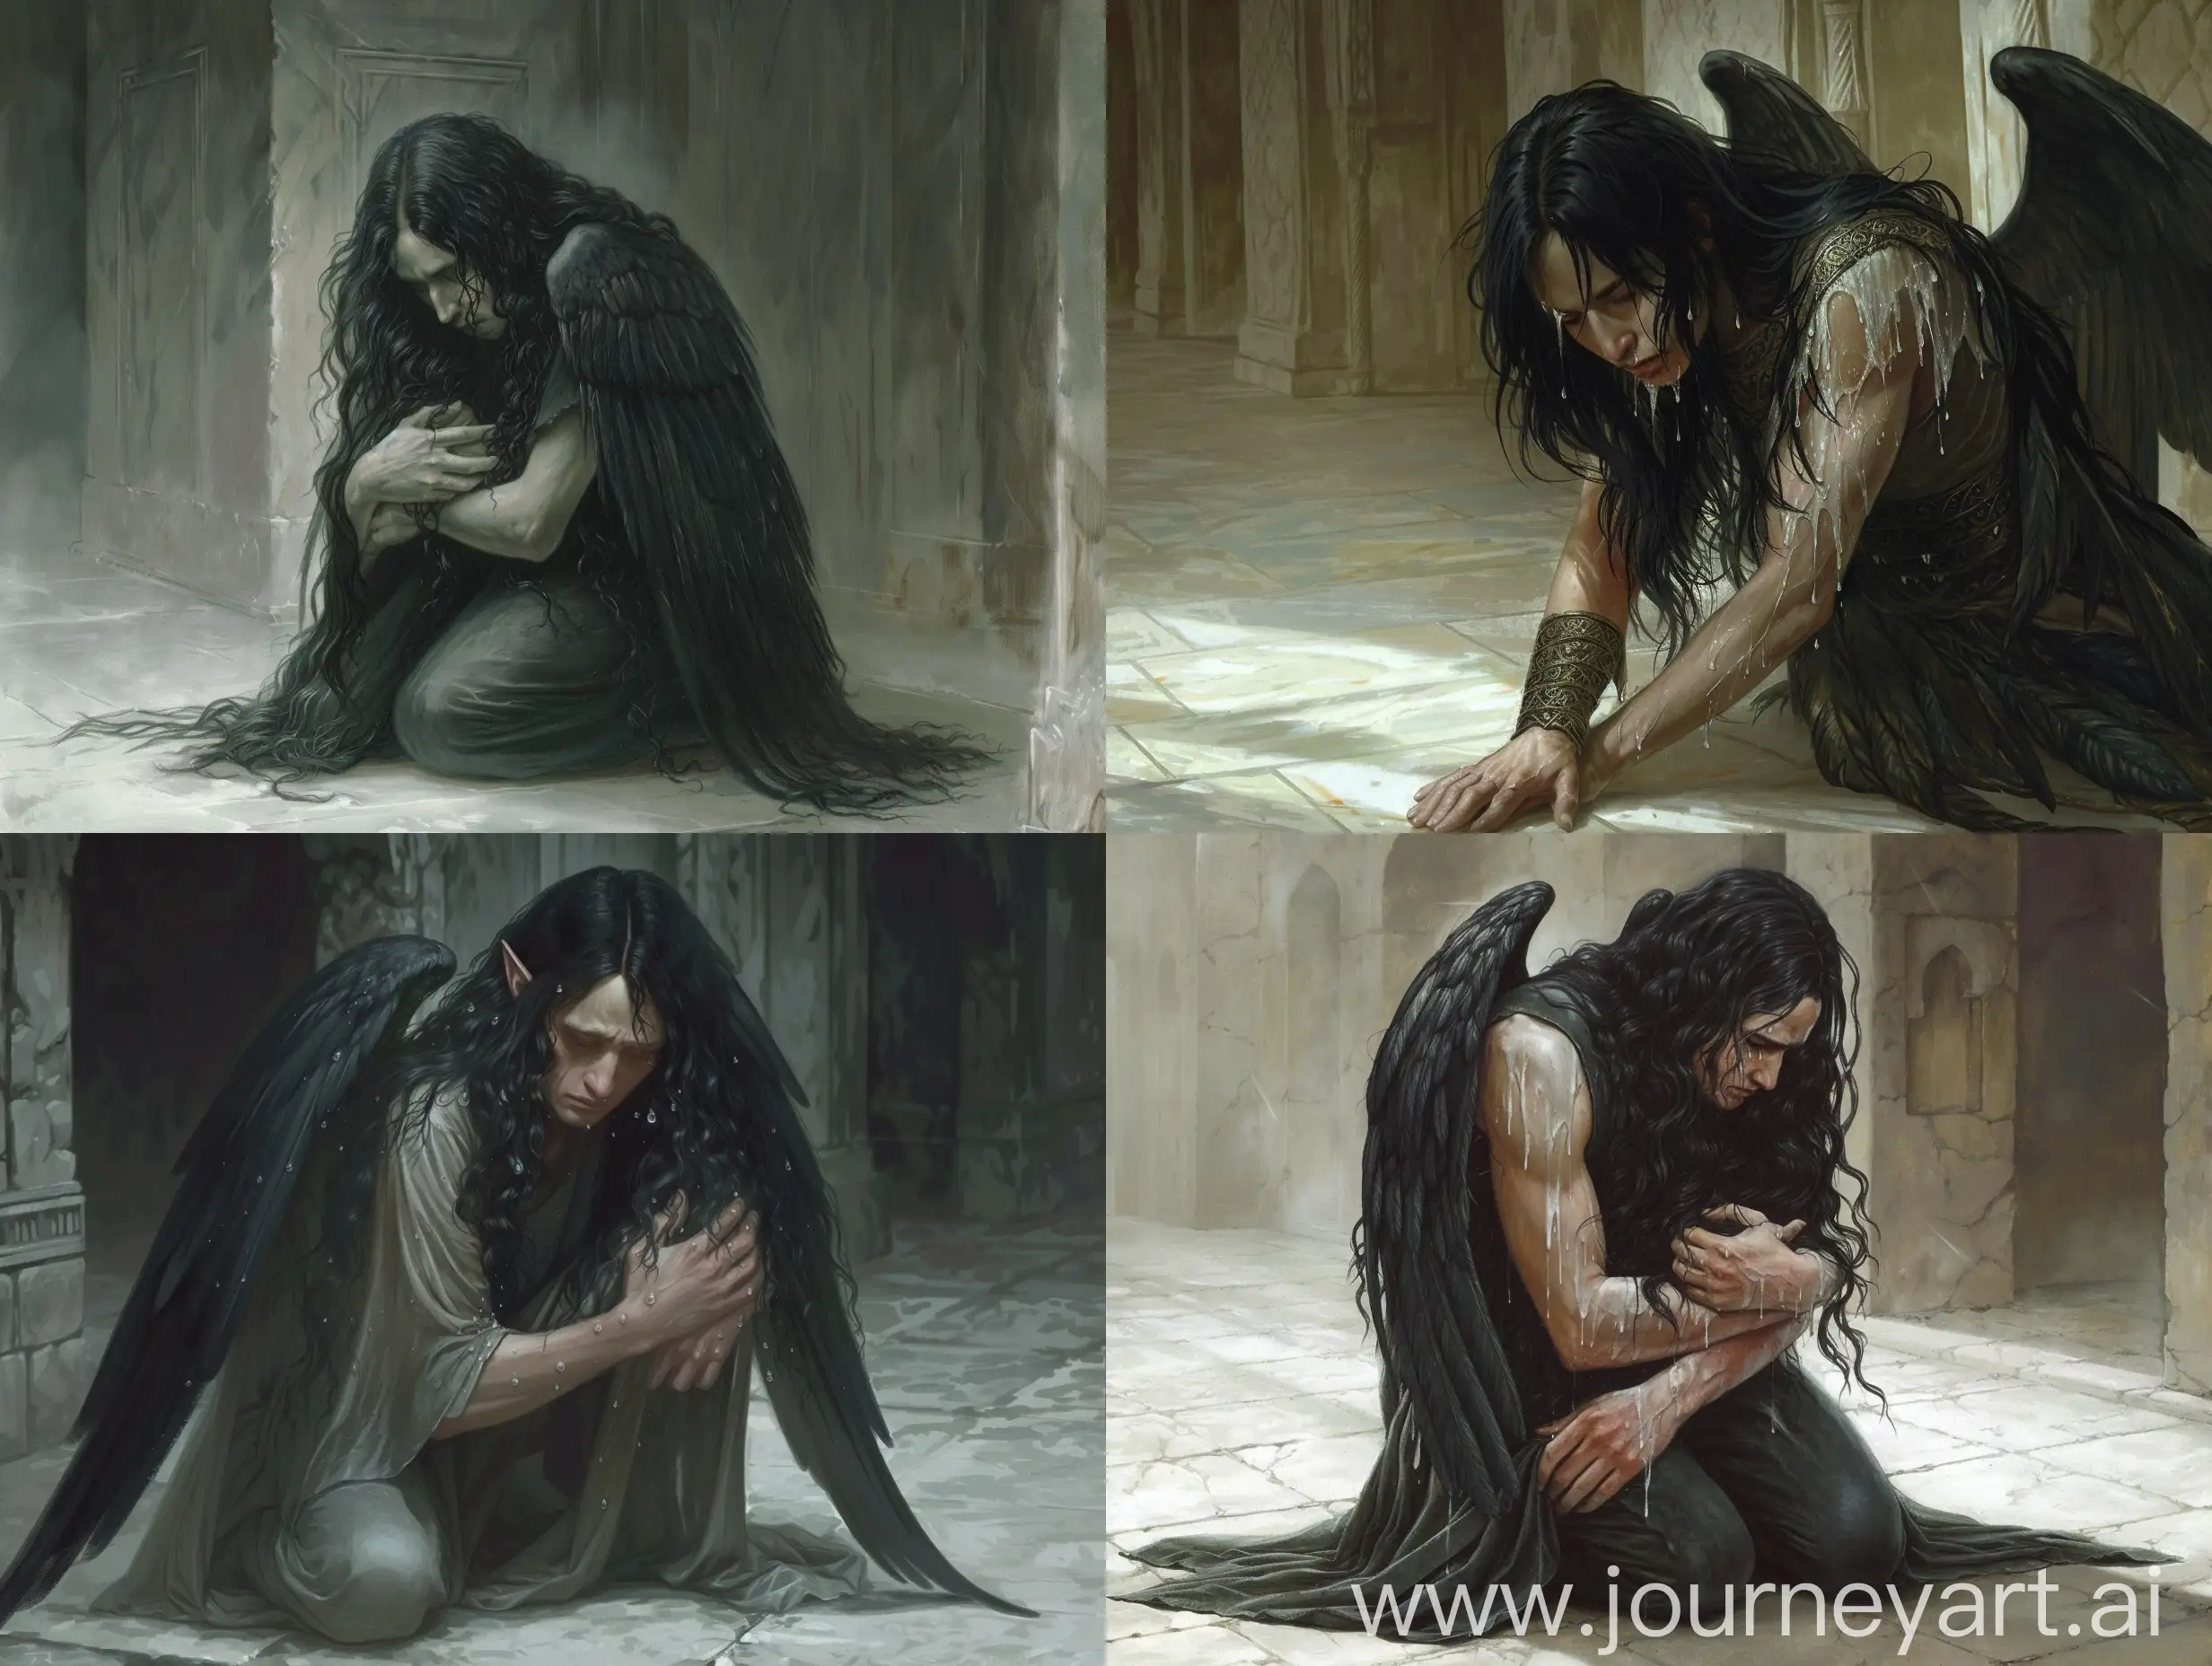 In a scene of heart-wrenching tragedy, the angel Shemyaza is depicted kneeling upon the cold, stone floor, cradling the lifeless form of his beloved wife in his arms. His long black hair cascades like a veil of mourning around his shoulders, framing a face of angelic innocence and divine purity, his pale skin glowing softly in the dim light.

Tears stream down Shemyaza's cheeks, his sorrow palpable as he weeps for the loss of his beloved. Yet, beneath the surface of his grief, there burns a fierce anger and unyielding fury. His innocent appearance belies the tumultuous storm raging within him, as he struggles to comprehend the senseless cruelty that has torn his world apart.

With trembling hands, he holds his wife's lifeless body close, his fingers tracing the contours of her face with a tenderness born of love and despair. The weight of her absence bears down upon him like a crushing burden, threatening to engulf him in a sea of darkness from which there is no escape.

In the midst of his mourning, Shemyaza's fury rises like a tempest, a raging fire that consumes him from within. His cries of anguish echo through the empty halls, a haunting lament for a love lost and a life stolen too soon.

In this poignant moment of sorrow and rage, Shemyaza is a figure of divine tragedy, a celestial being brought to his knees by the cruel hand of fate. And as he cradles his dead wife in his arms, his heart breaks anew with every beat, a testament to the depth of his love and the agony of his loss.